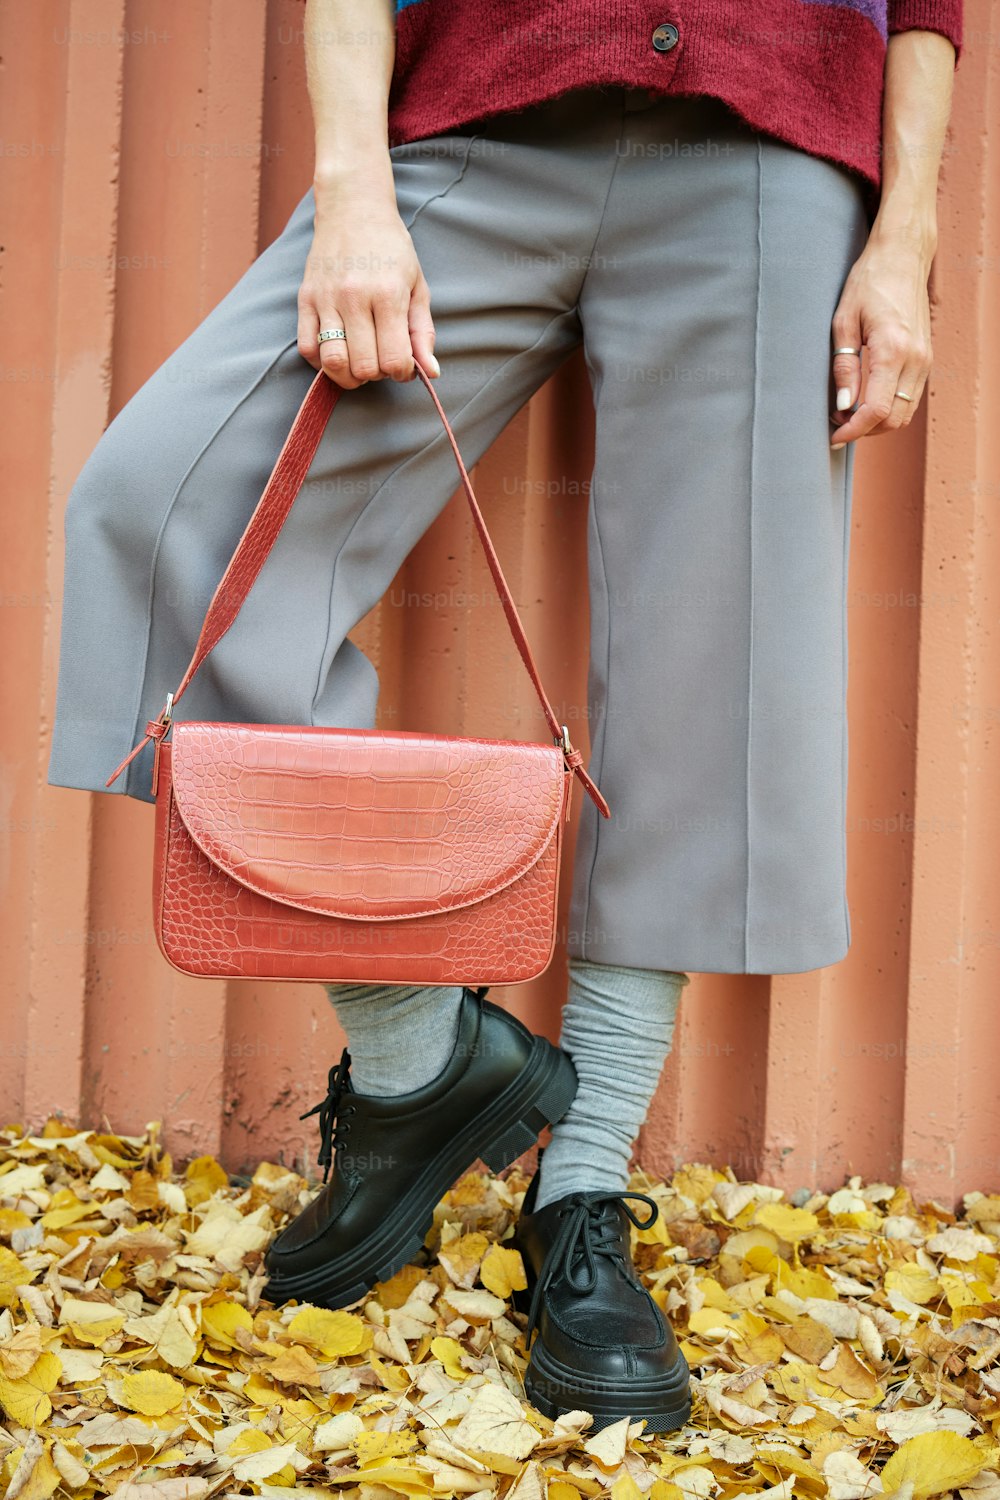 a woman is holding a pink purse in her hands